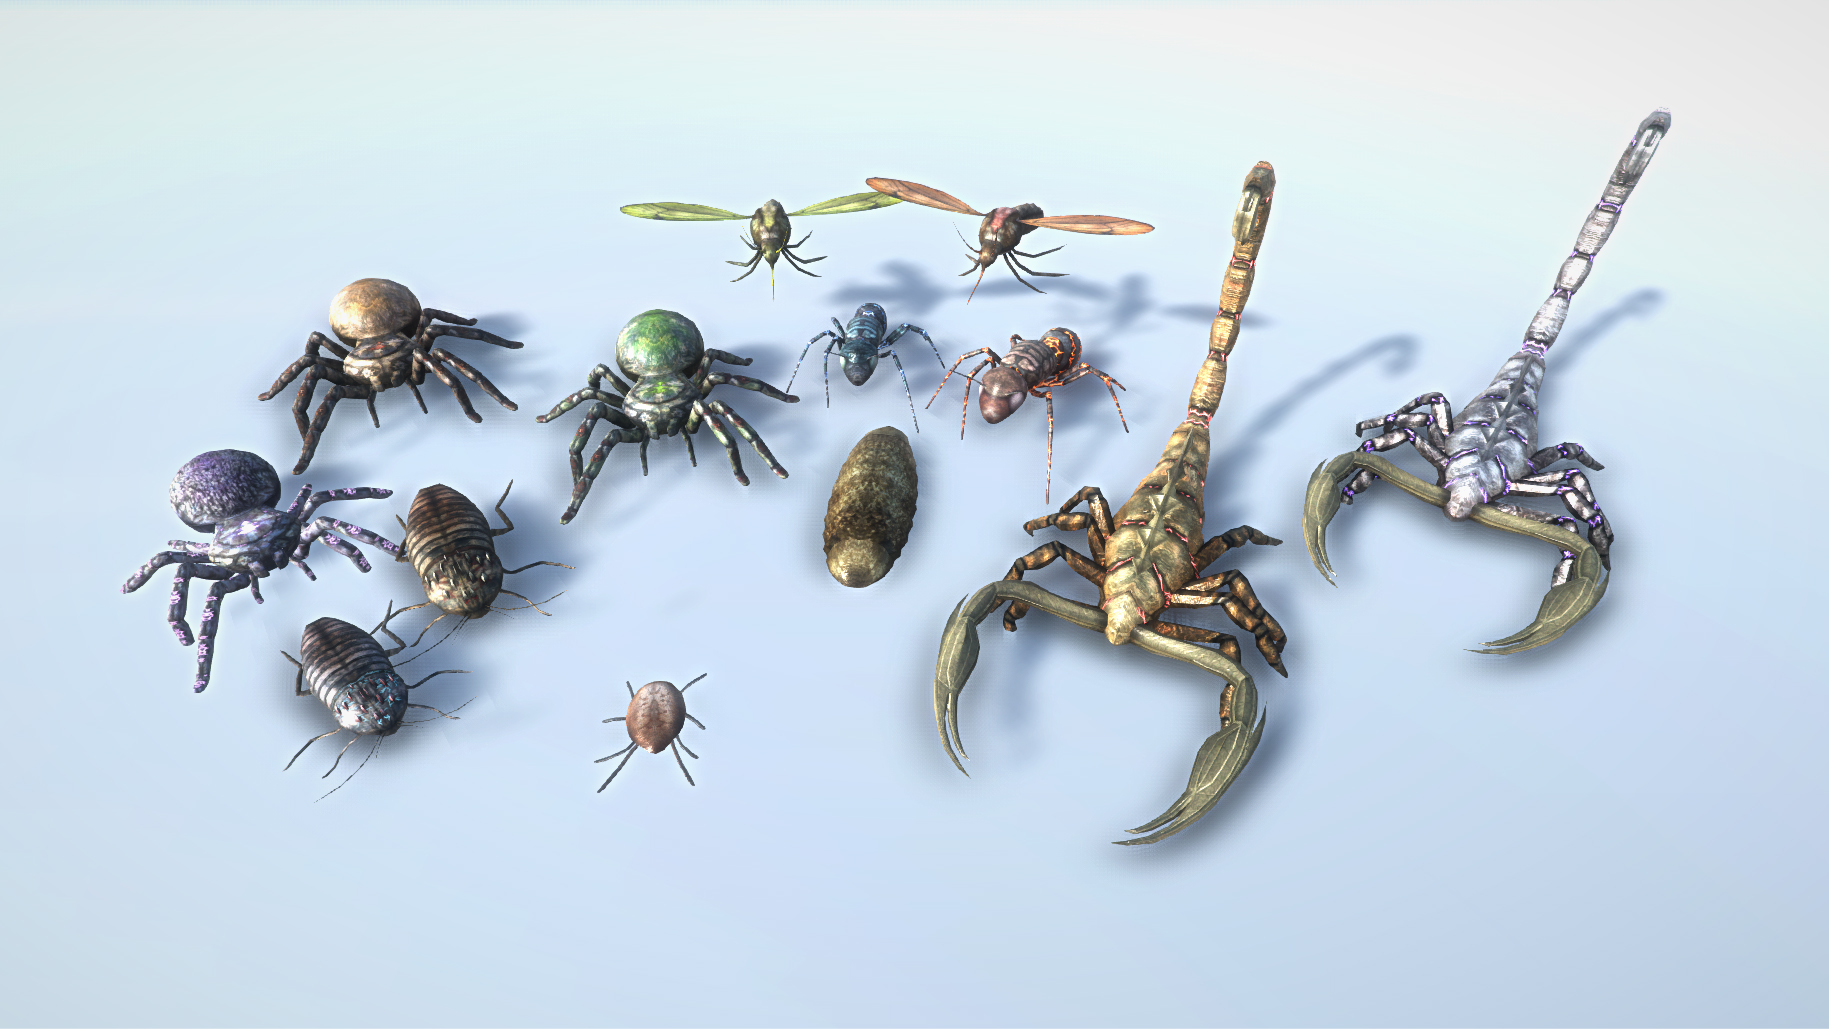 Insects of BoE